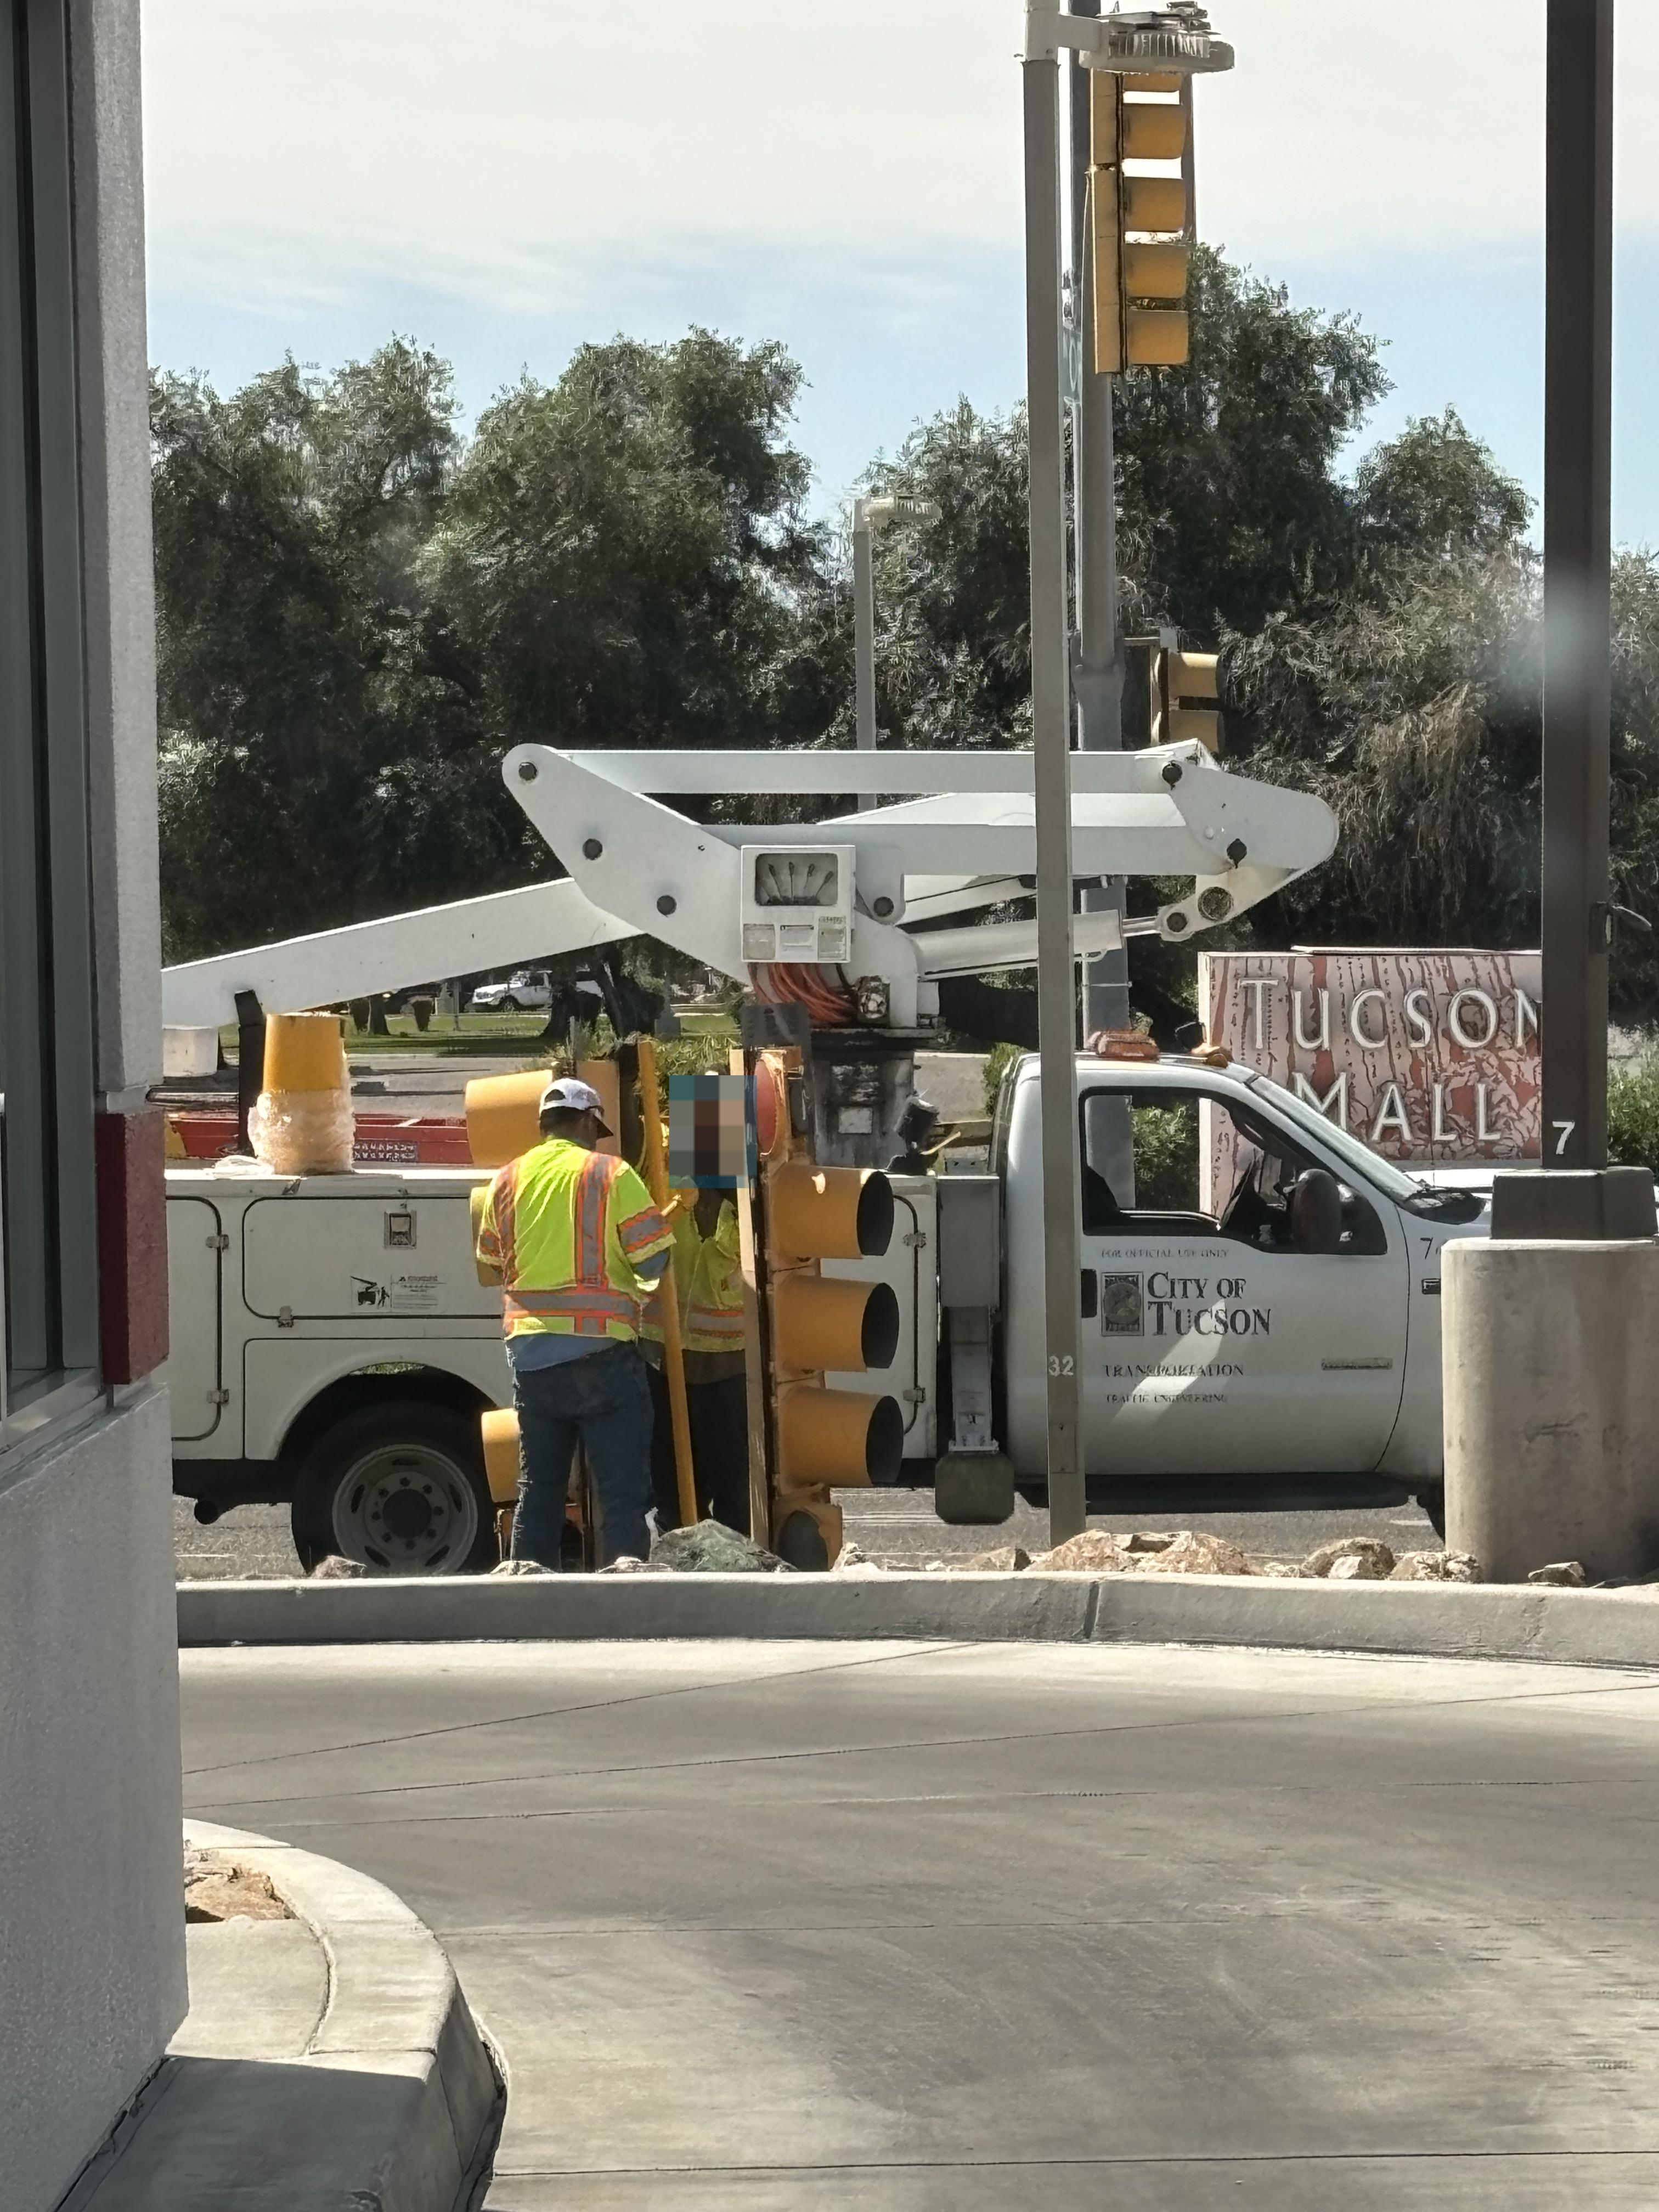 Two workers in safety vests operating a cherry picker near a &quot;City of Tucson&quot; truck